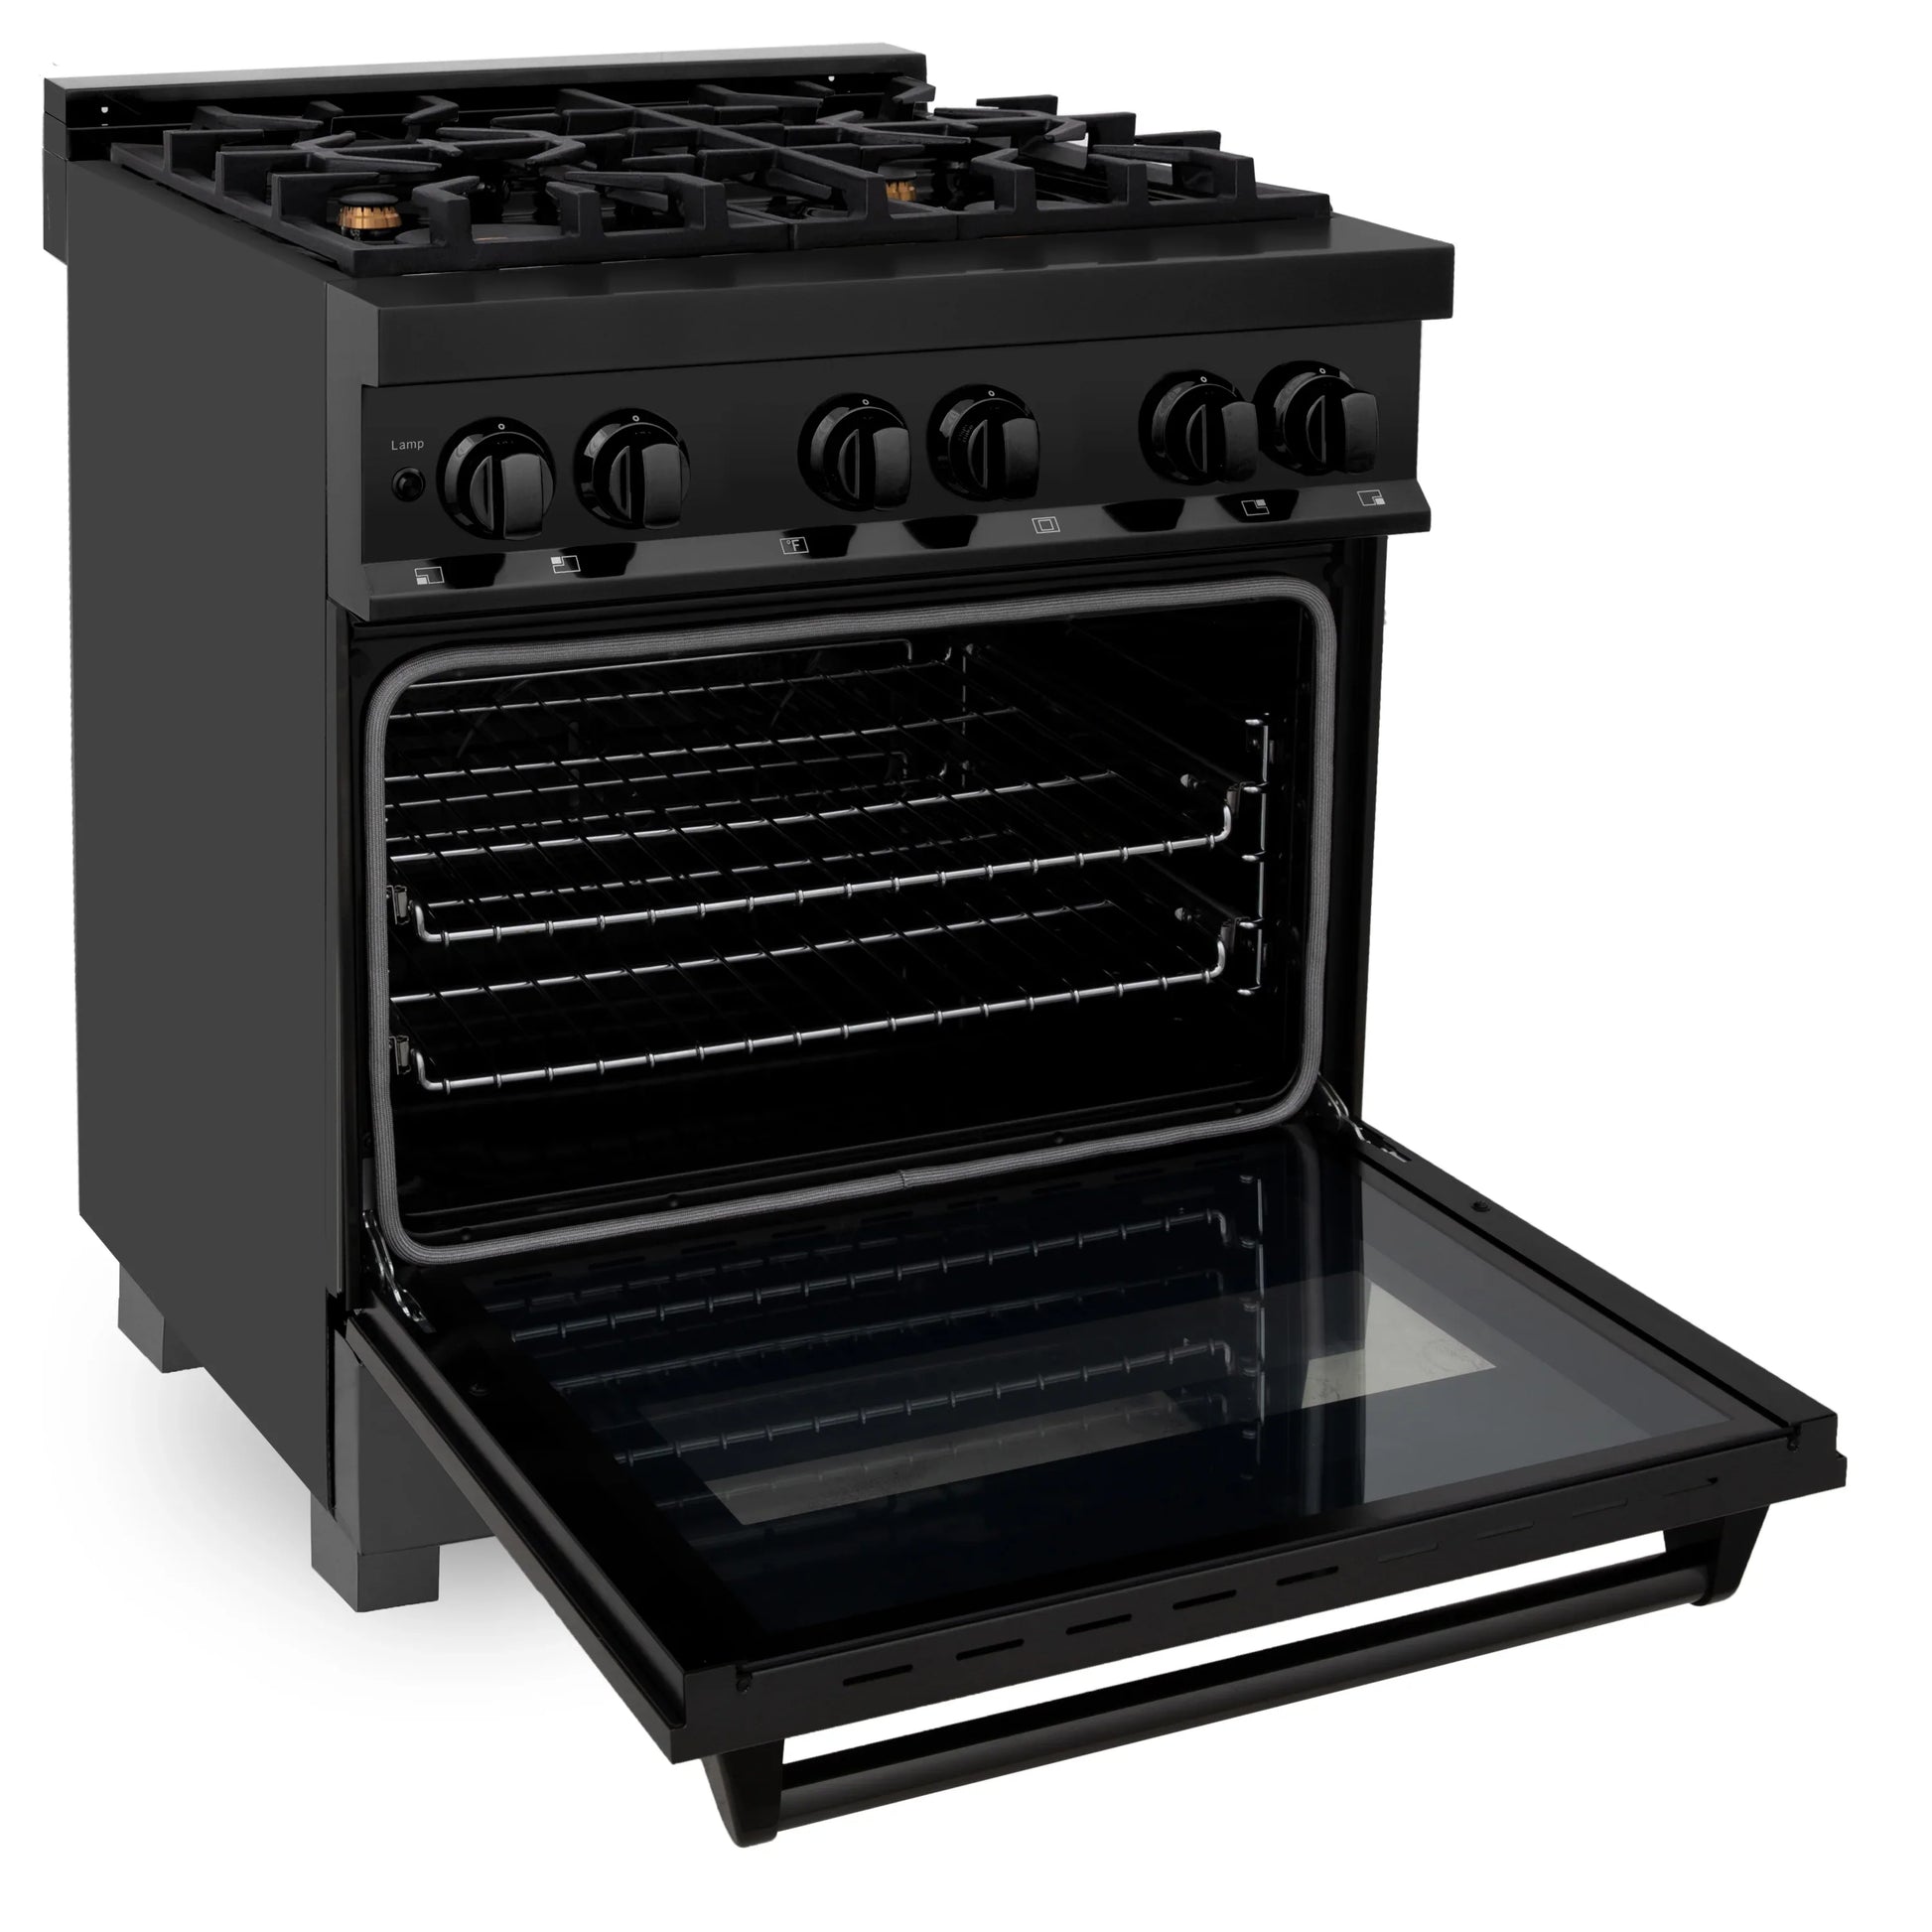 ZLINE 30" Dual Fuel Range - Black Stainless Steel with Brass Burners, Gas Stove, and Electric Oven